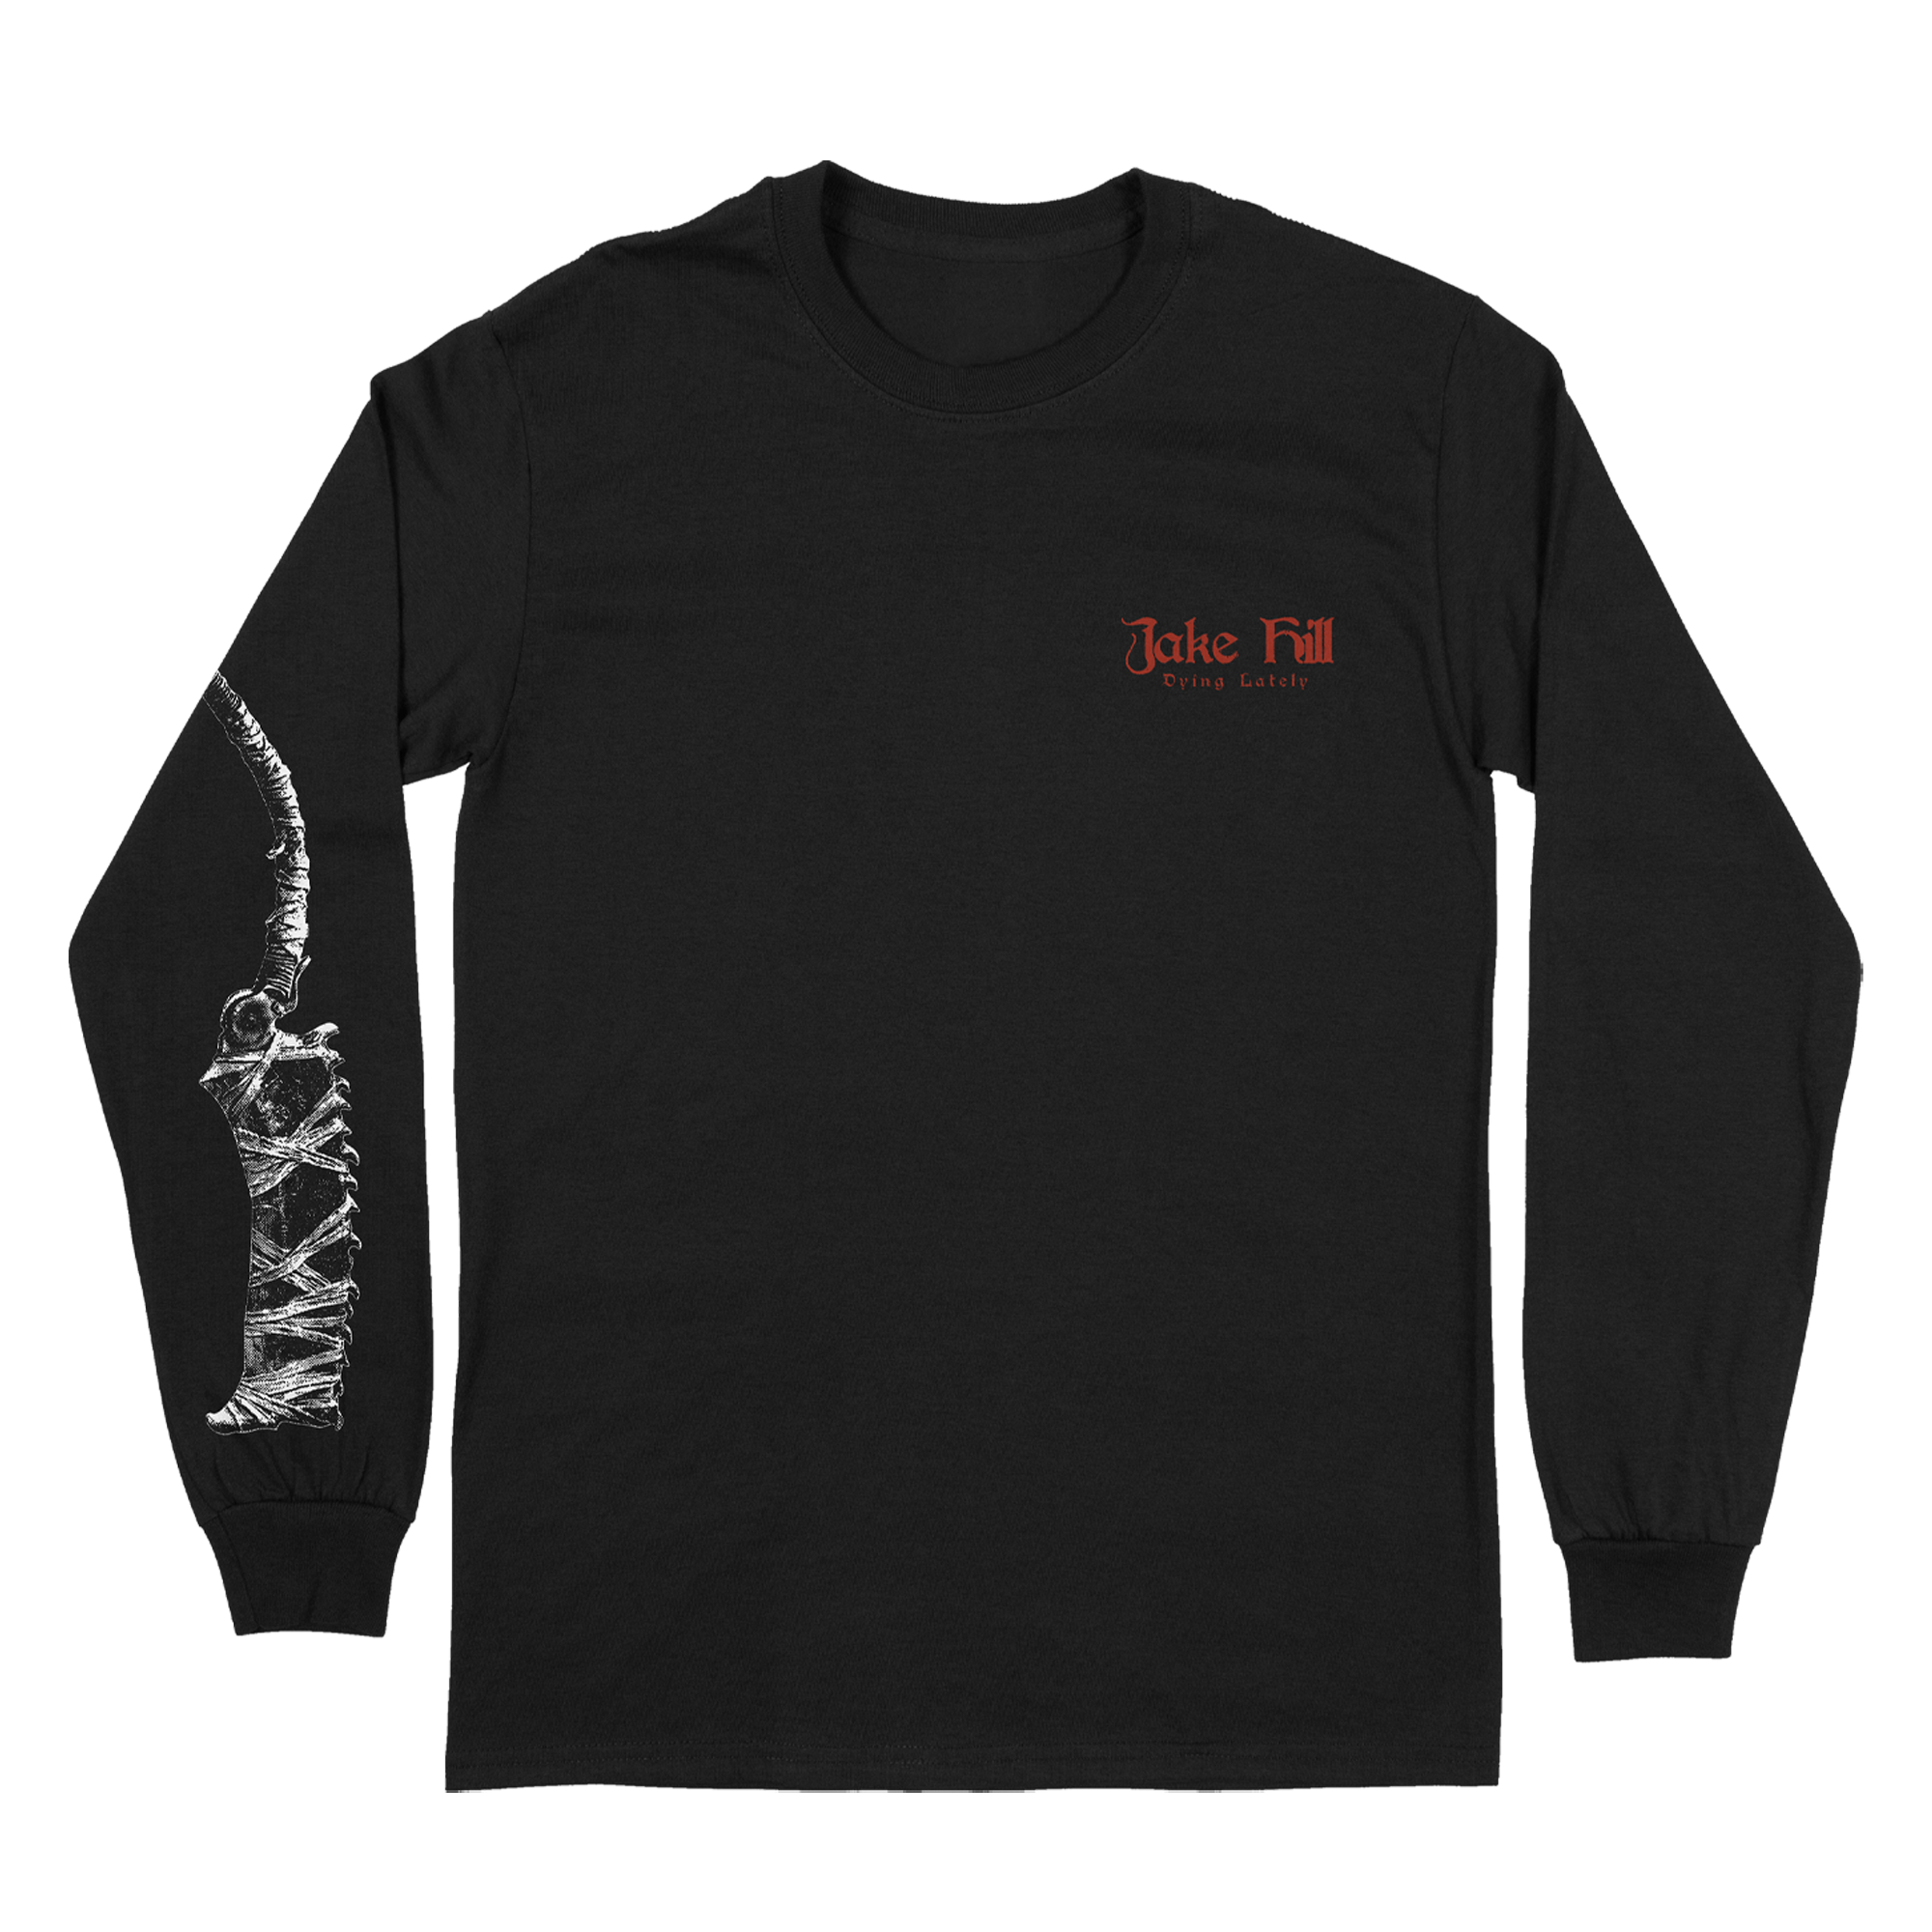 You Died Long Sleeve